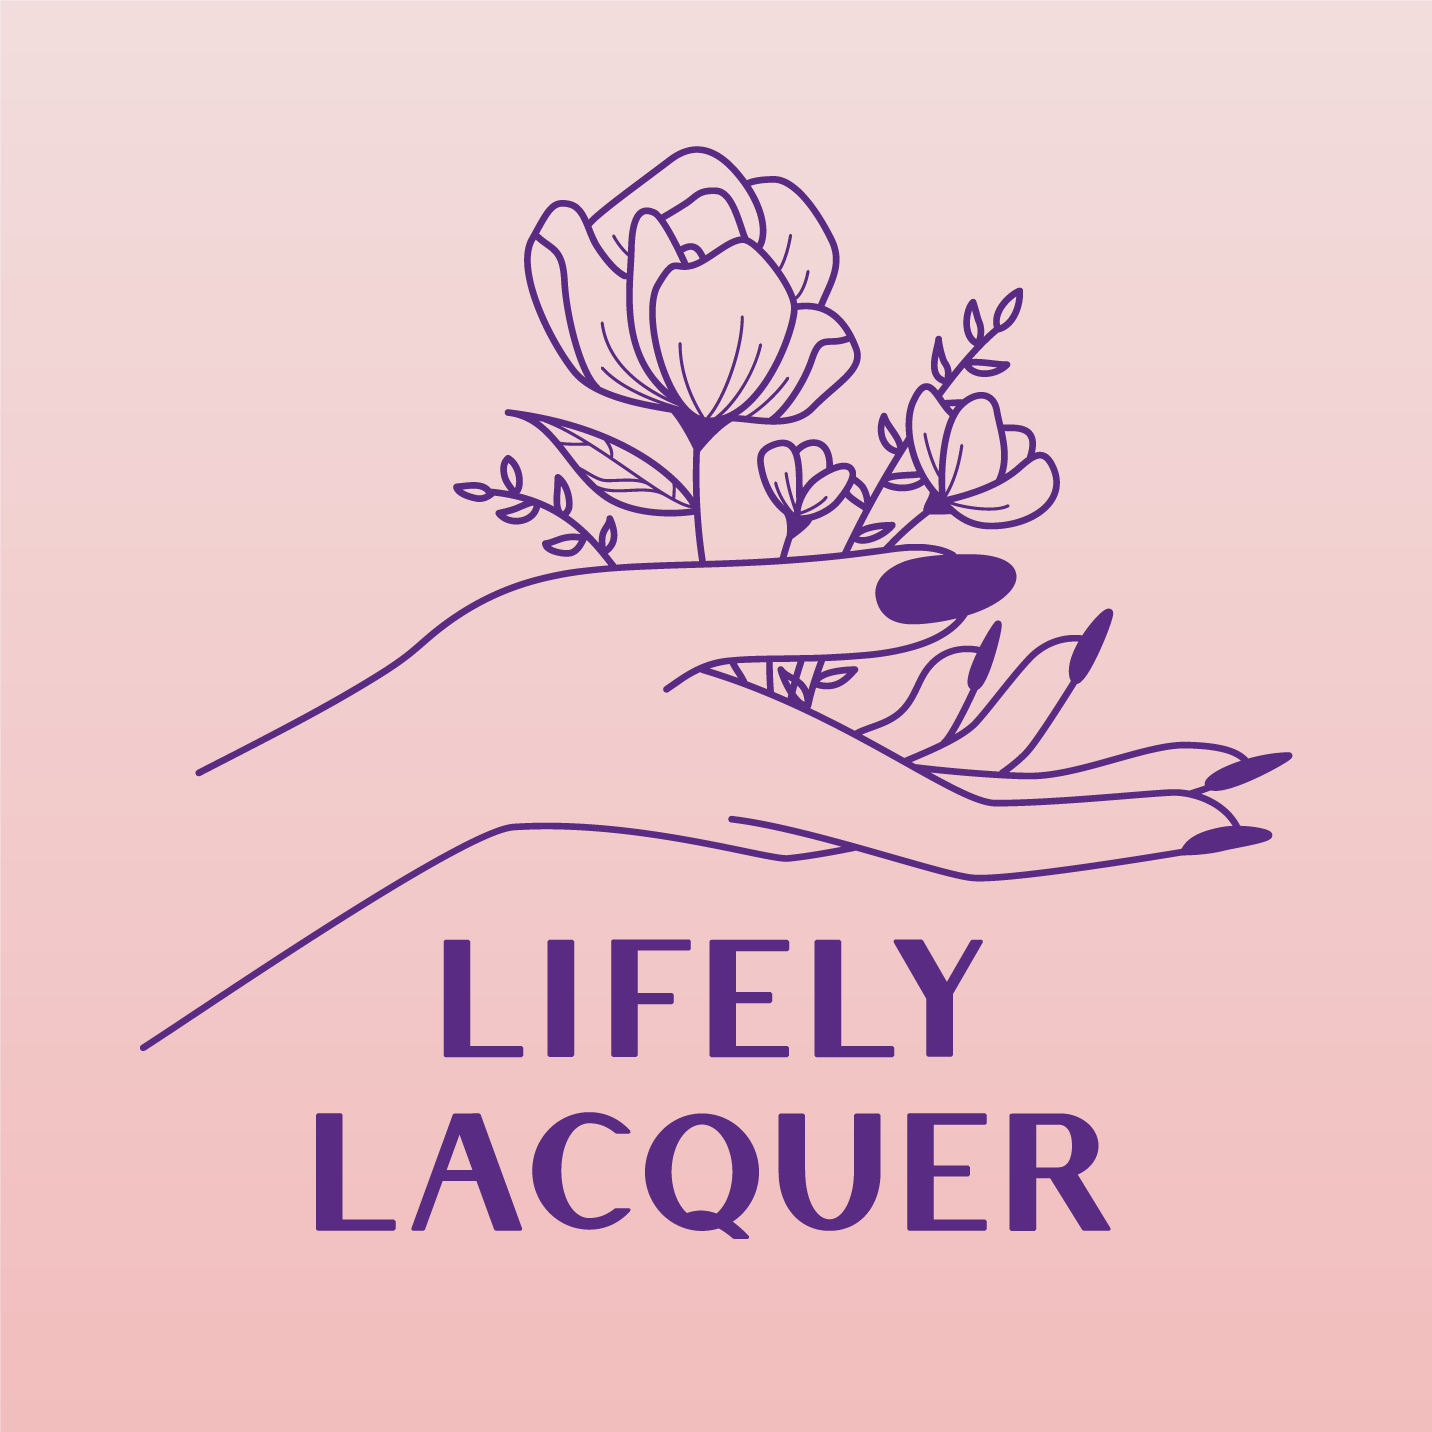 Lifely Lacquer